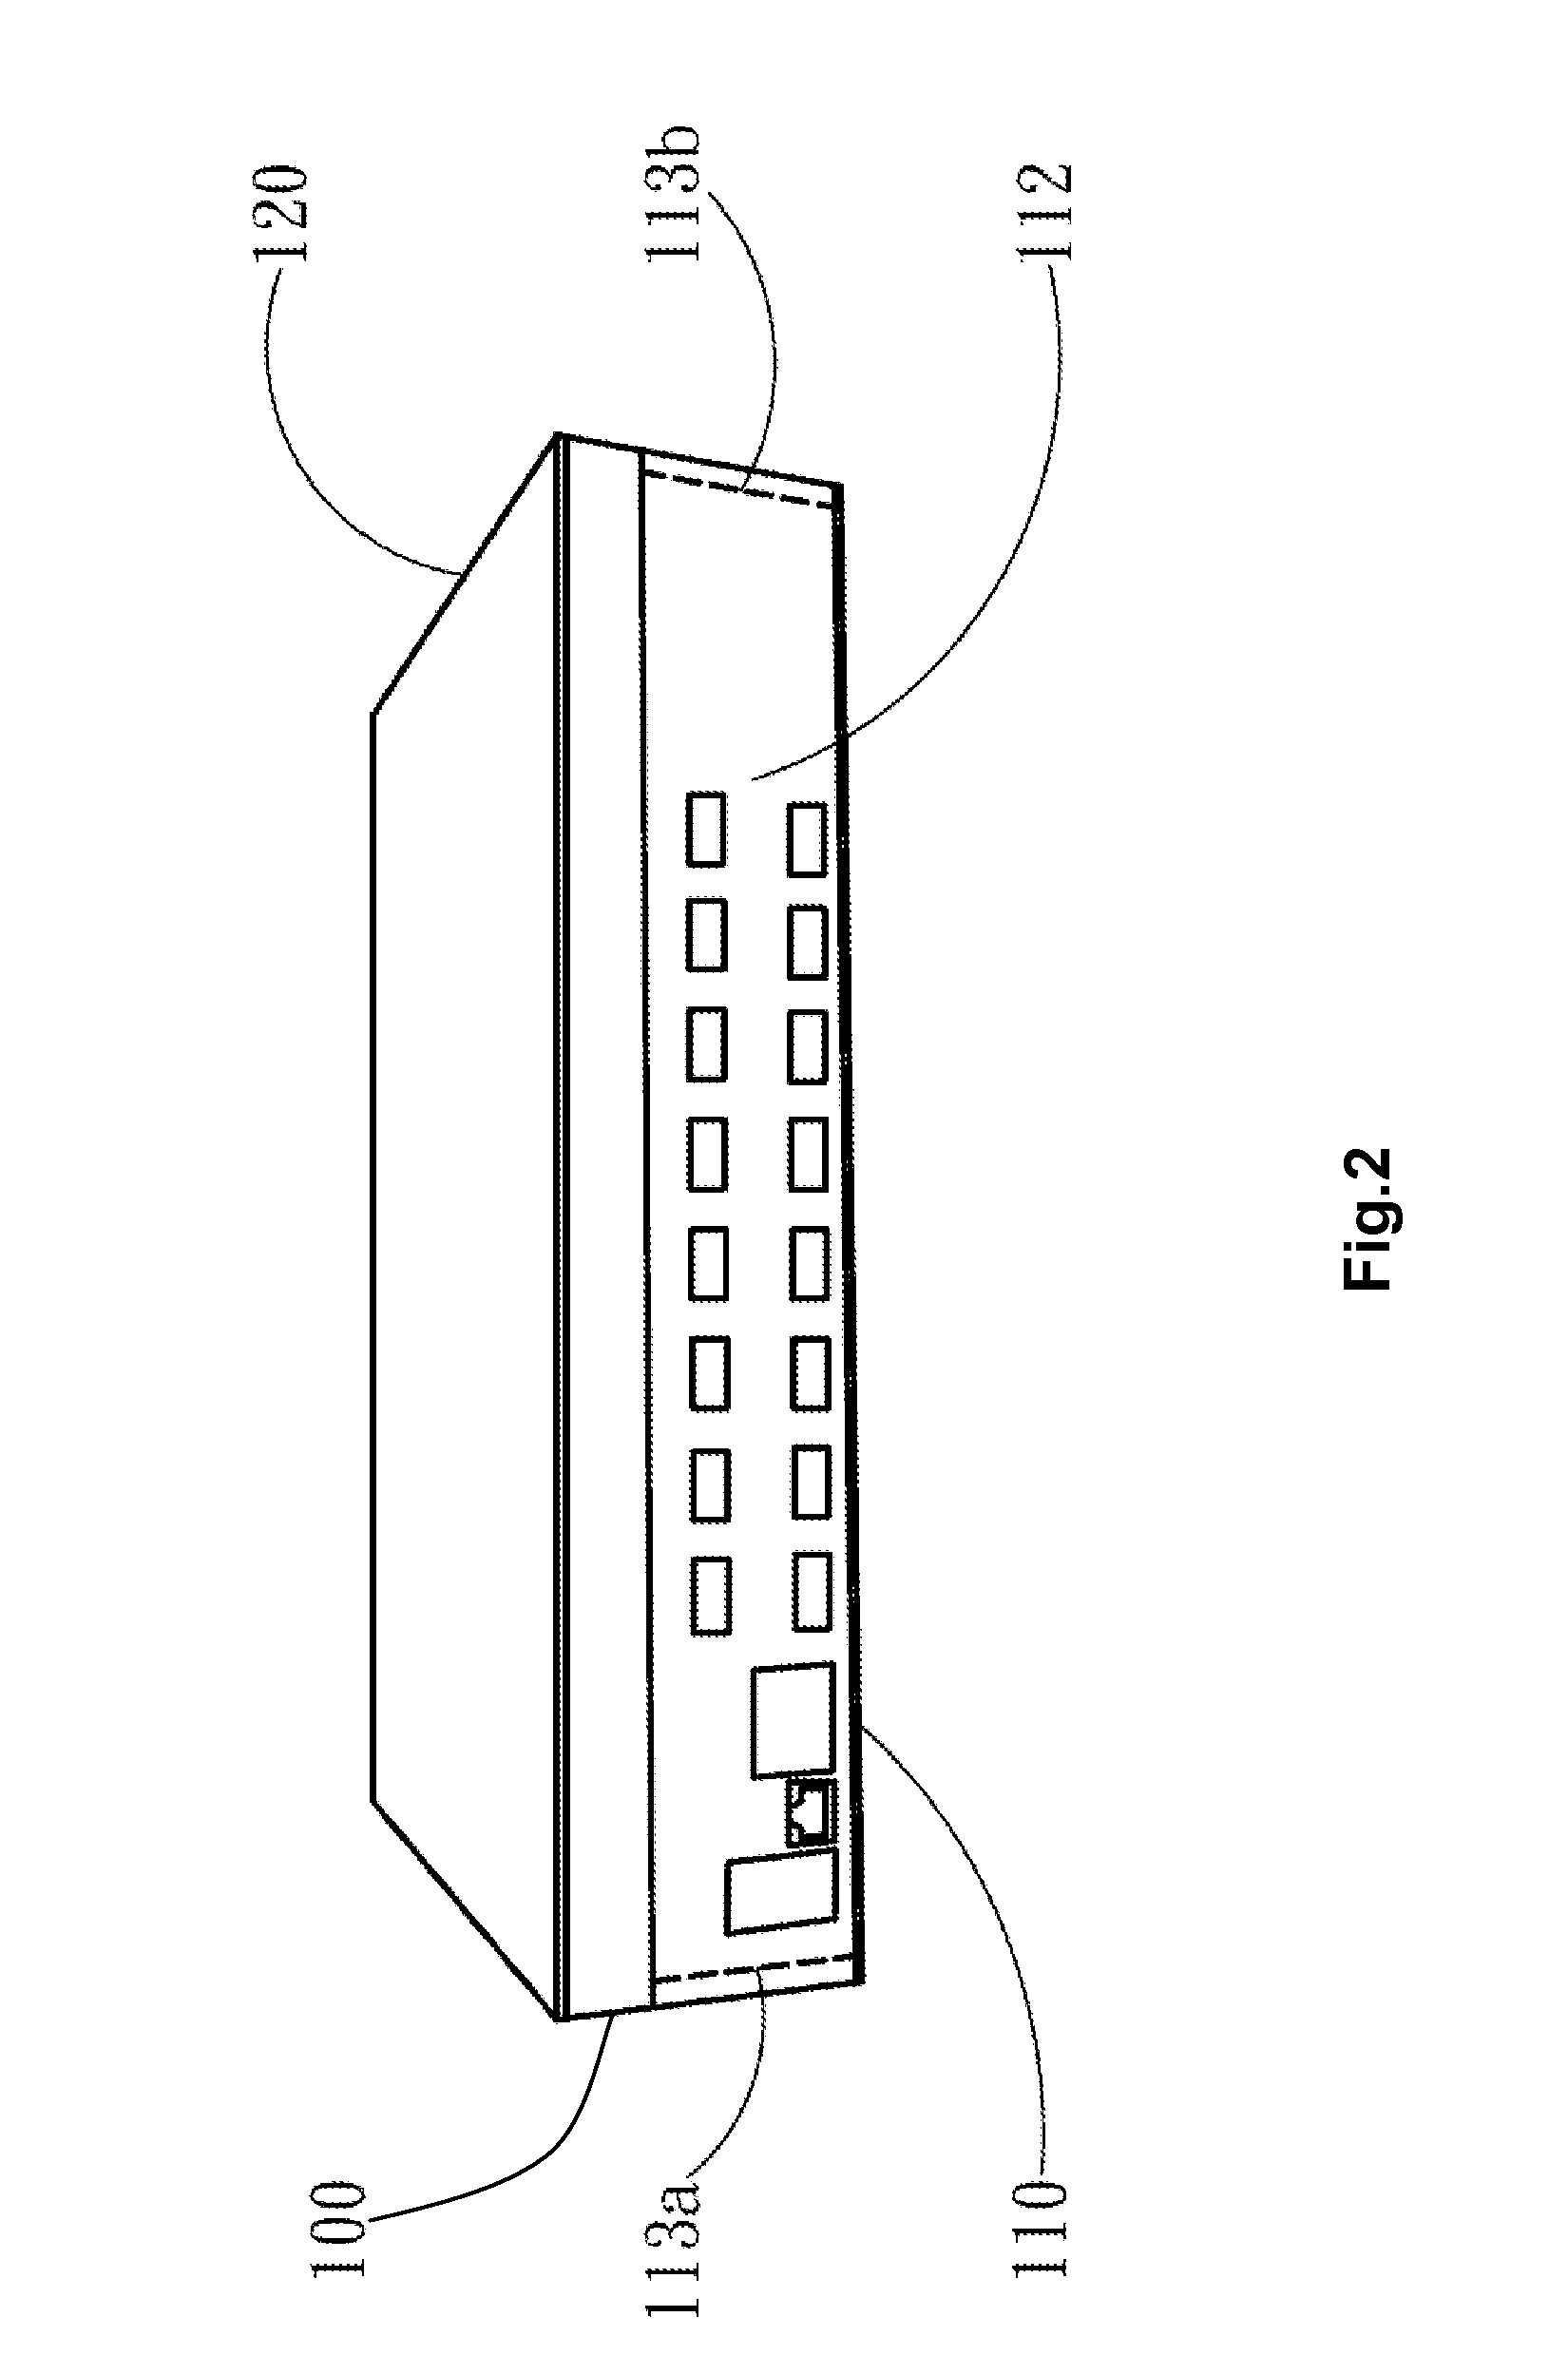 Server with a replaceable module